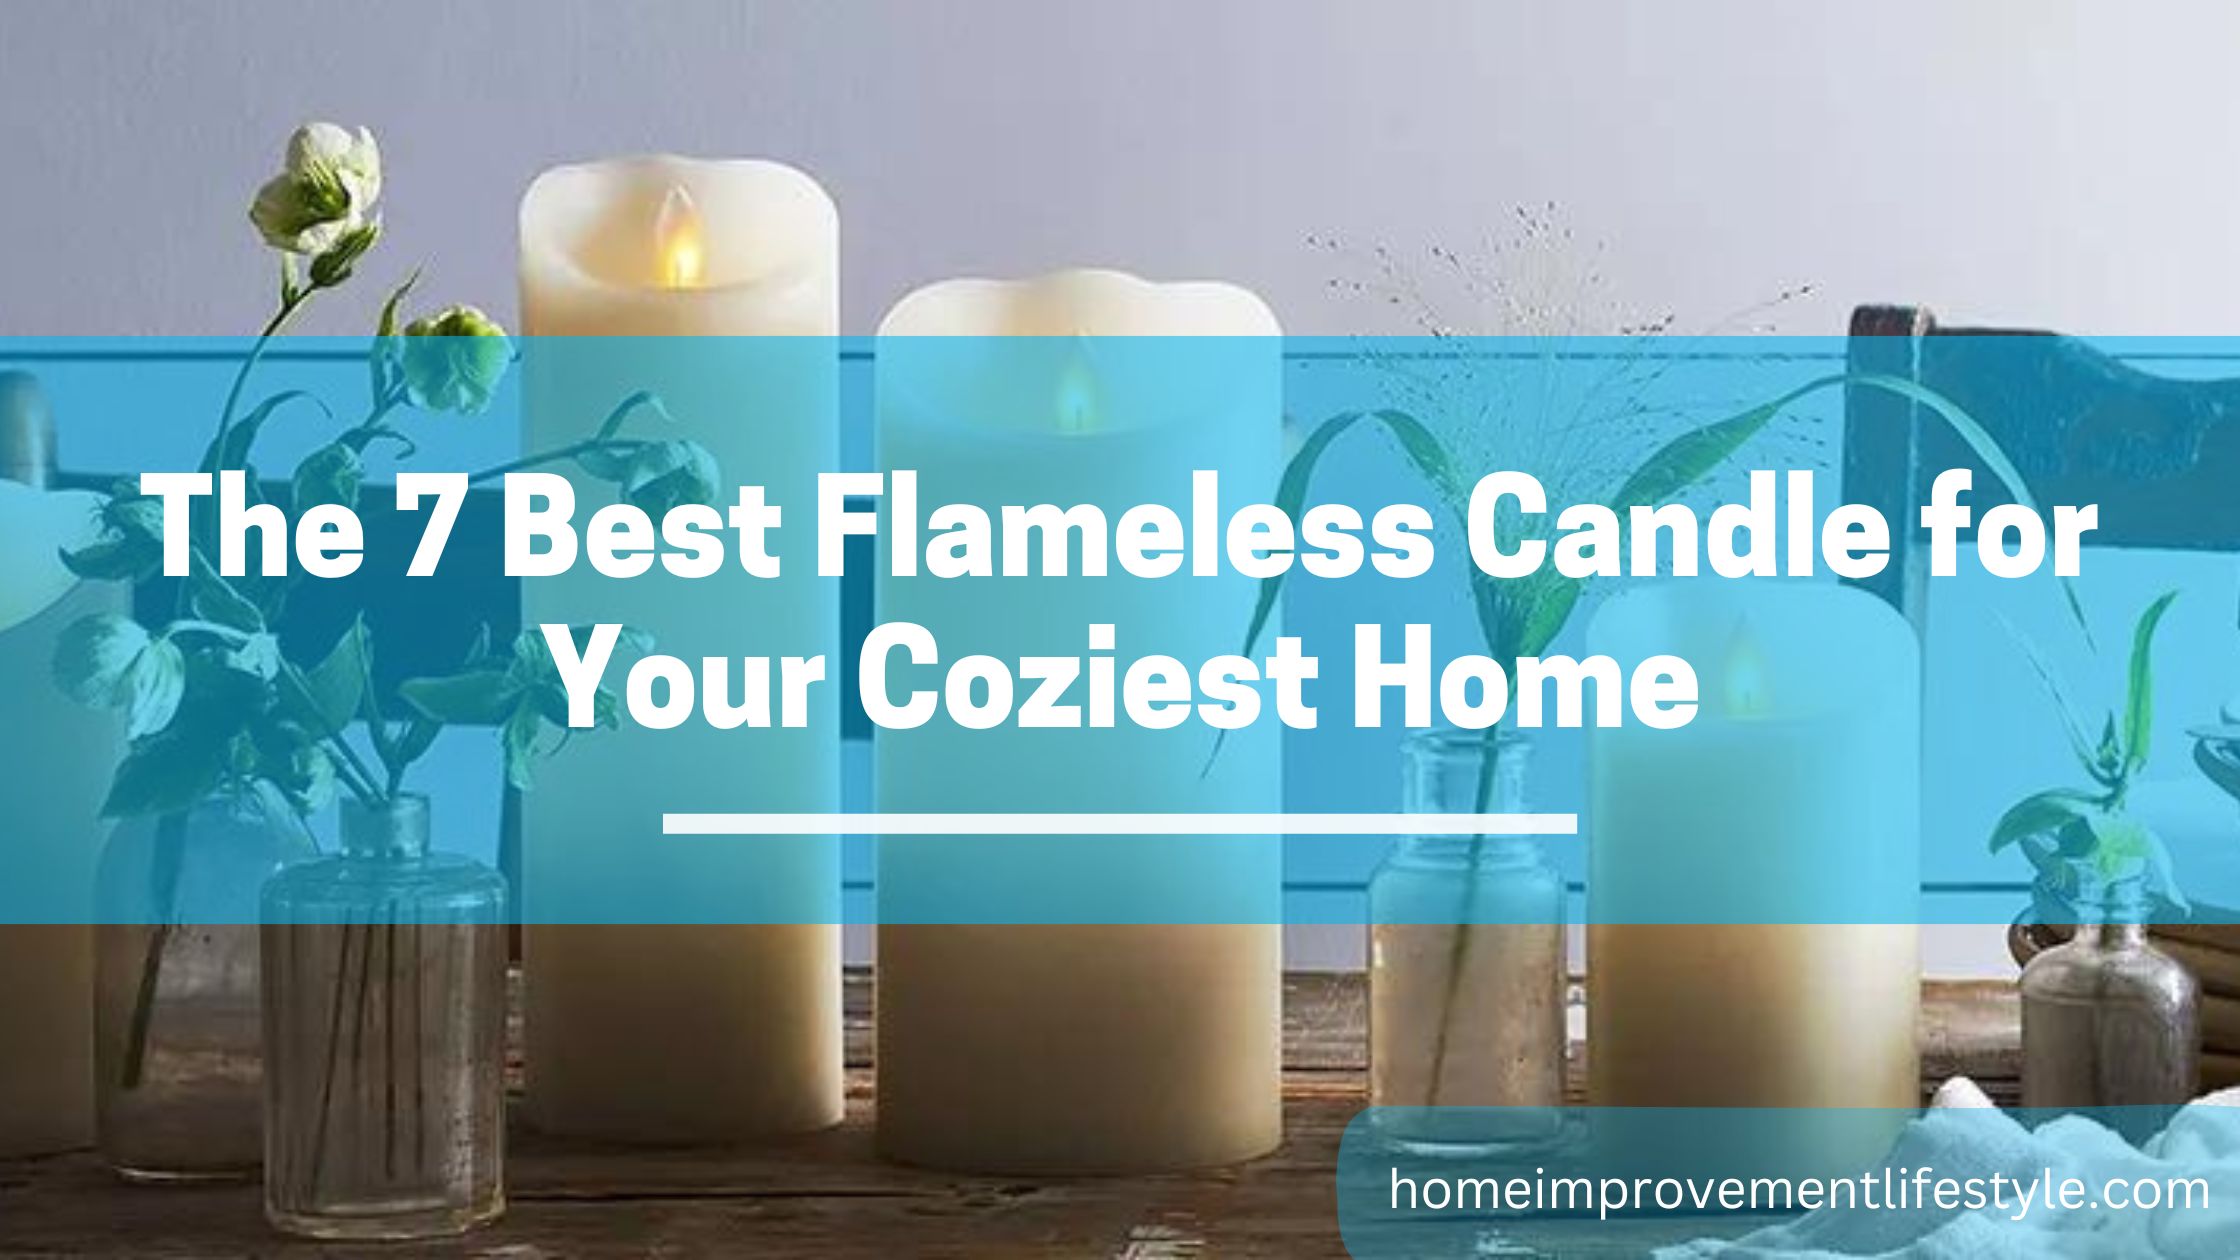 The 7 Best Flameless Candles for Your Coziest Home